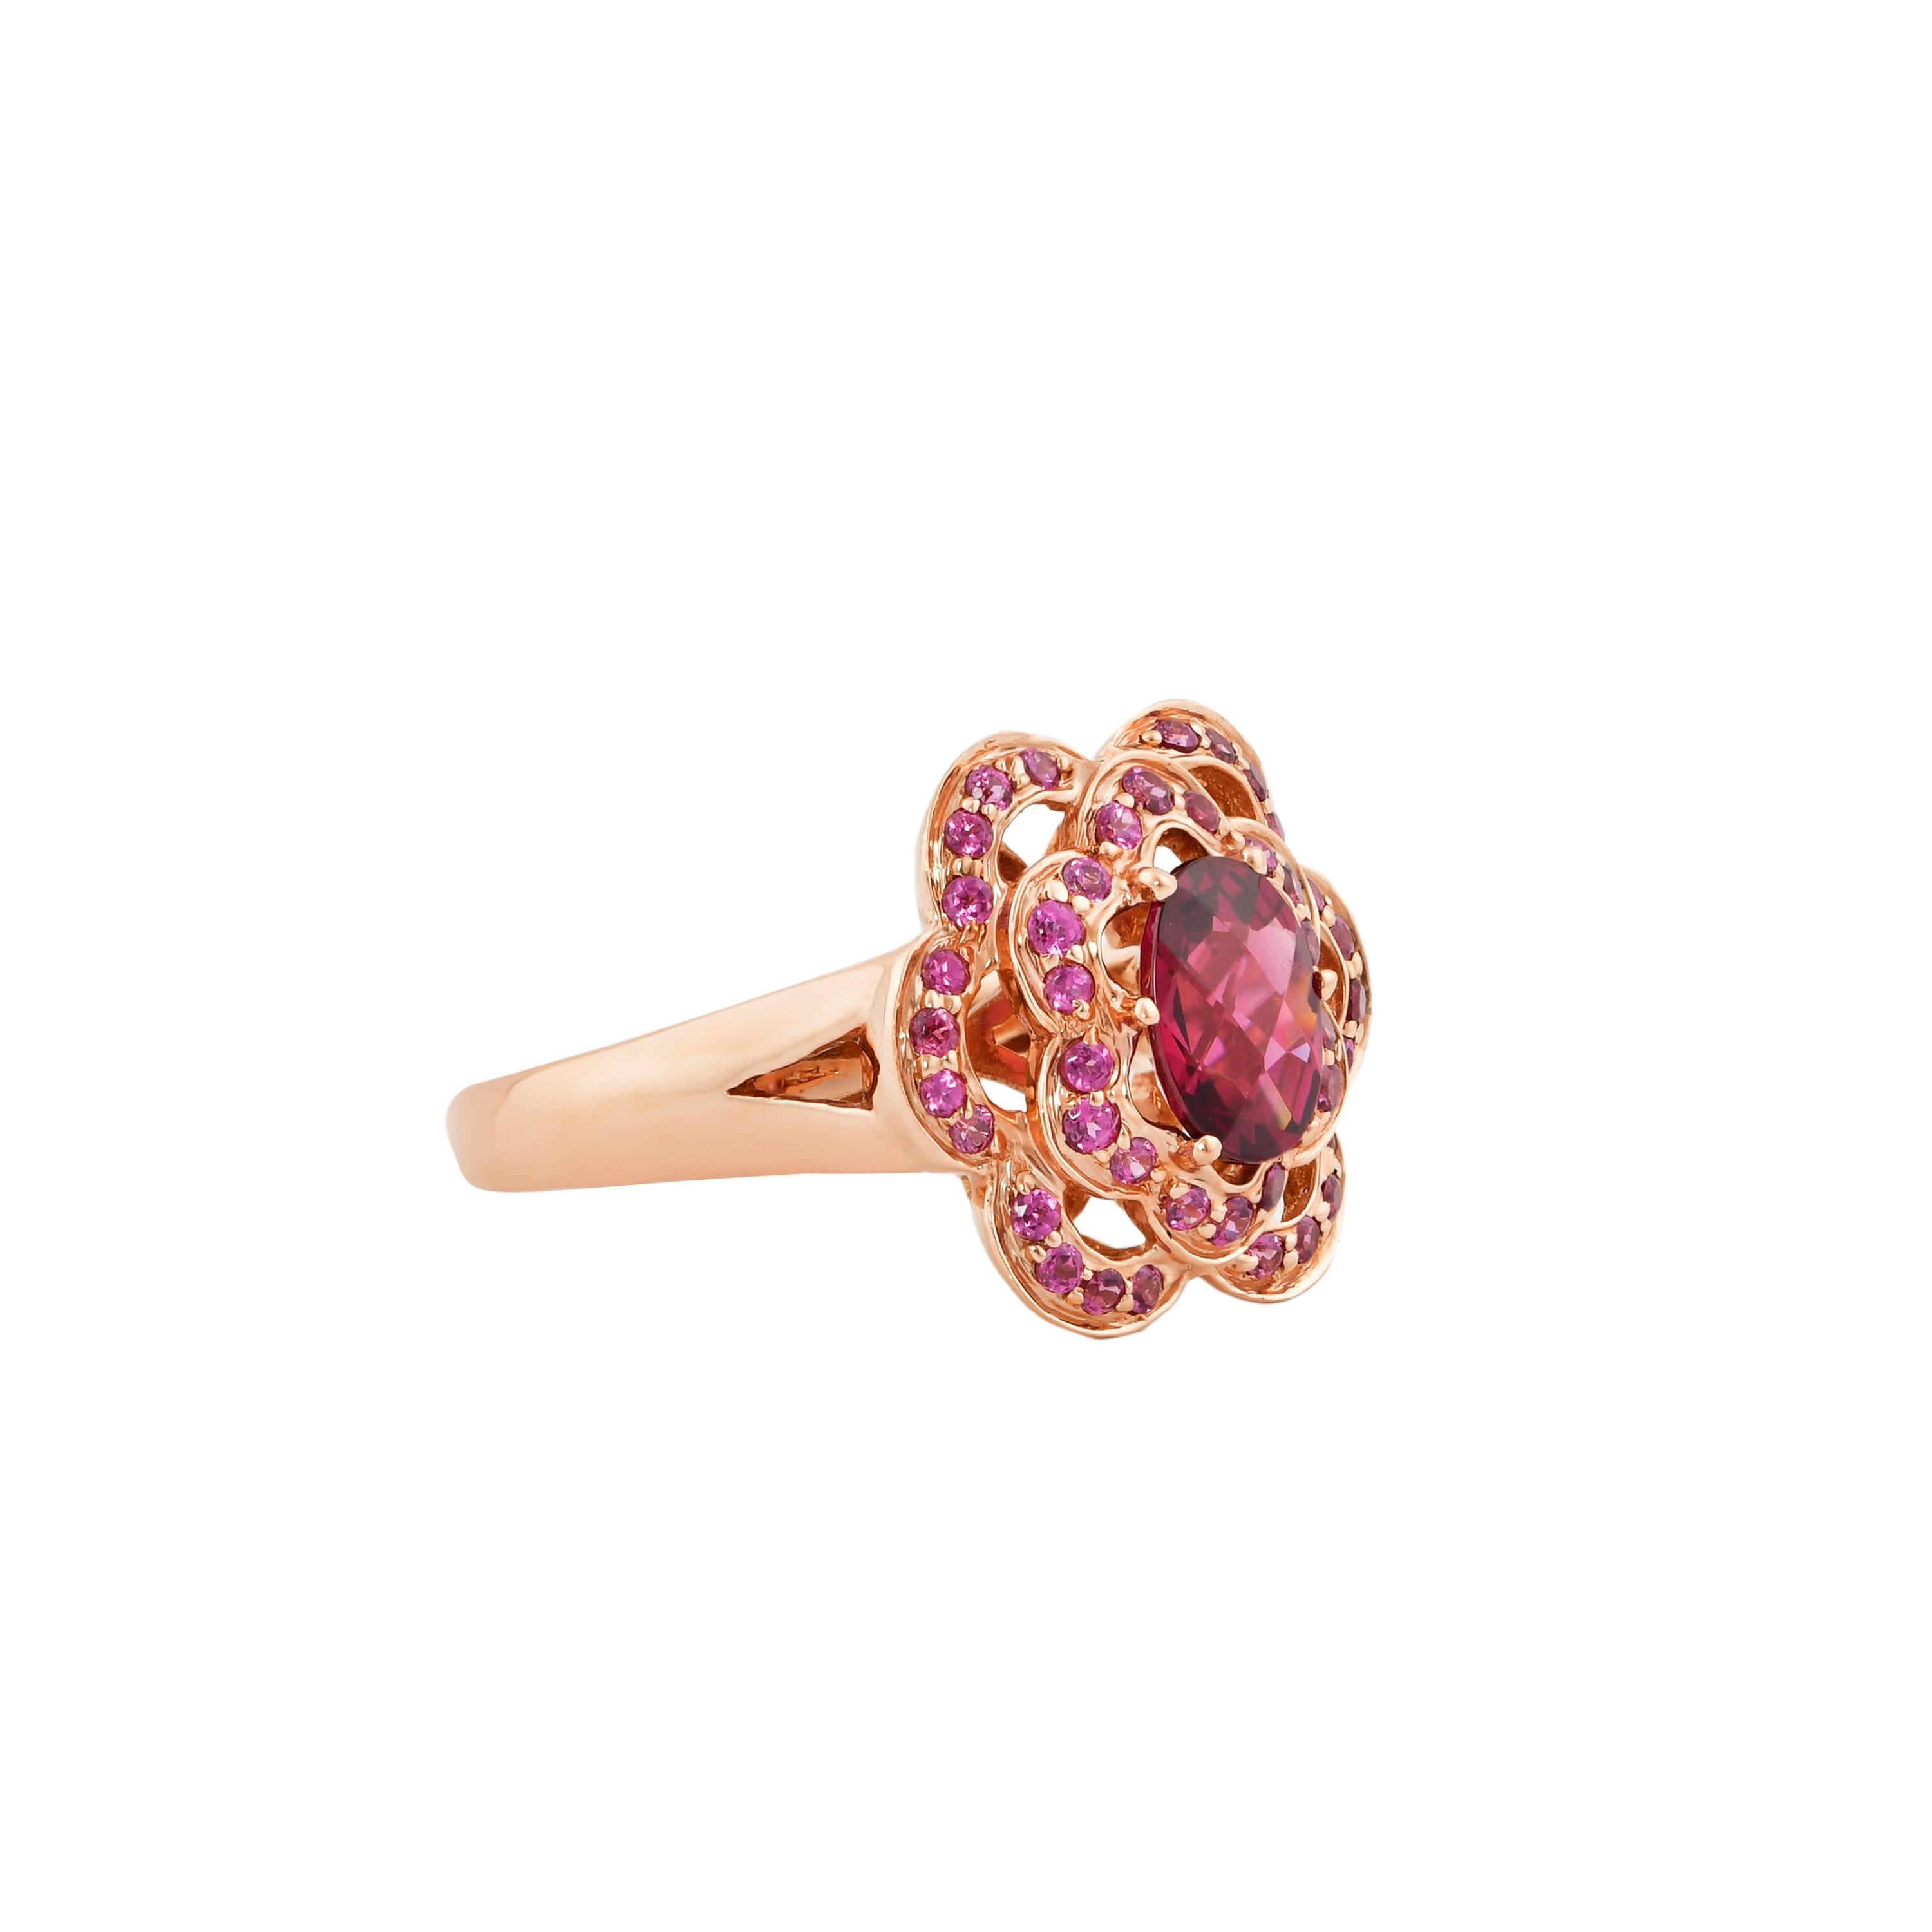 Glamorous Gemstones - Sunita Nahata started off her career as a gemstone trader, and this particular collection reflects her love for multi-colored semi-precious gemstones. This ring presents a radiant rhodolite center accented with pave rhodolites.